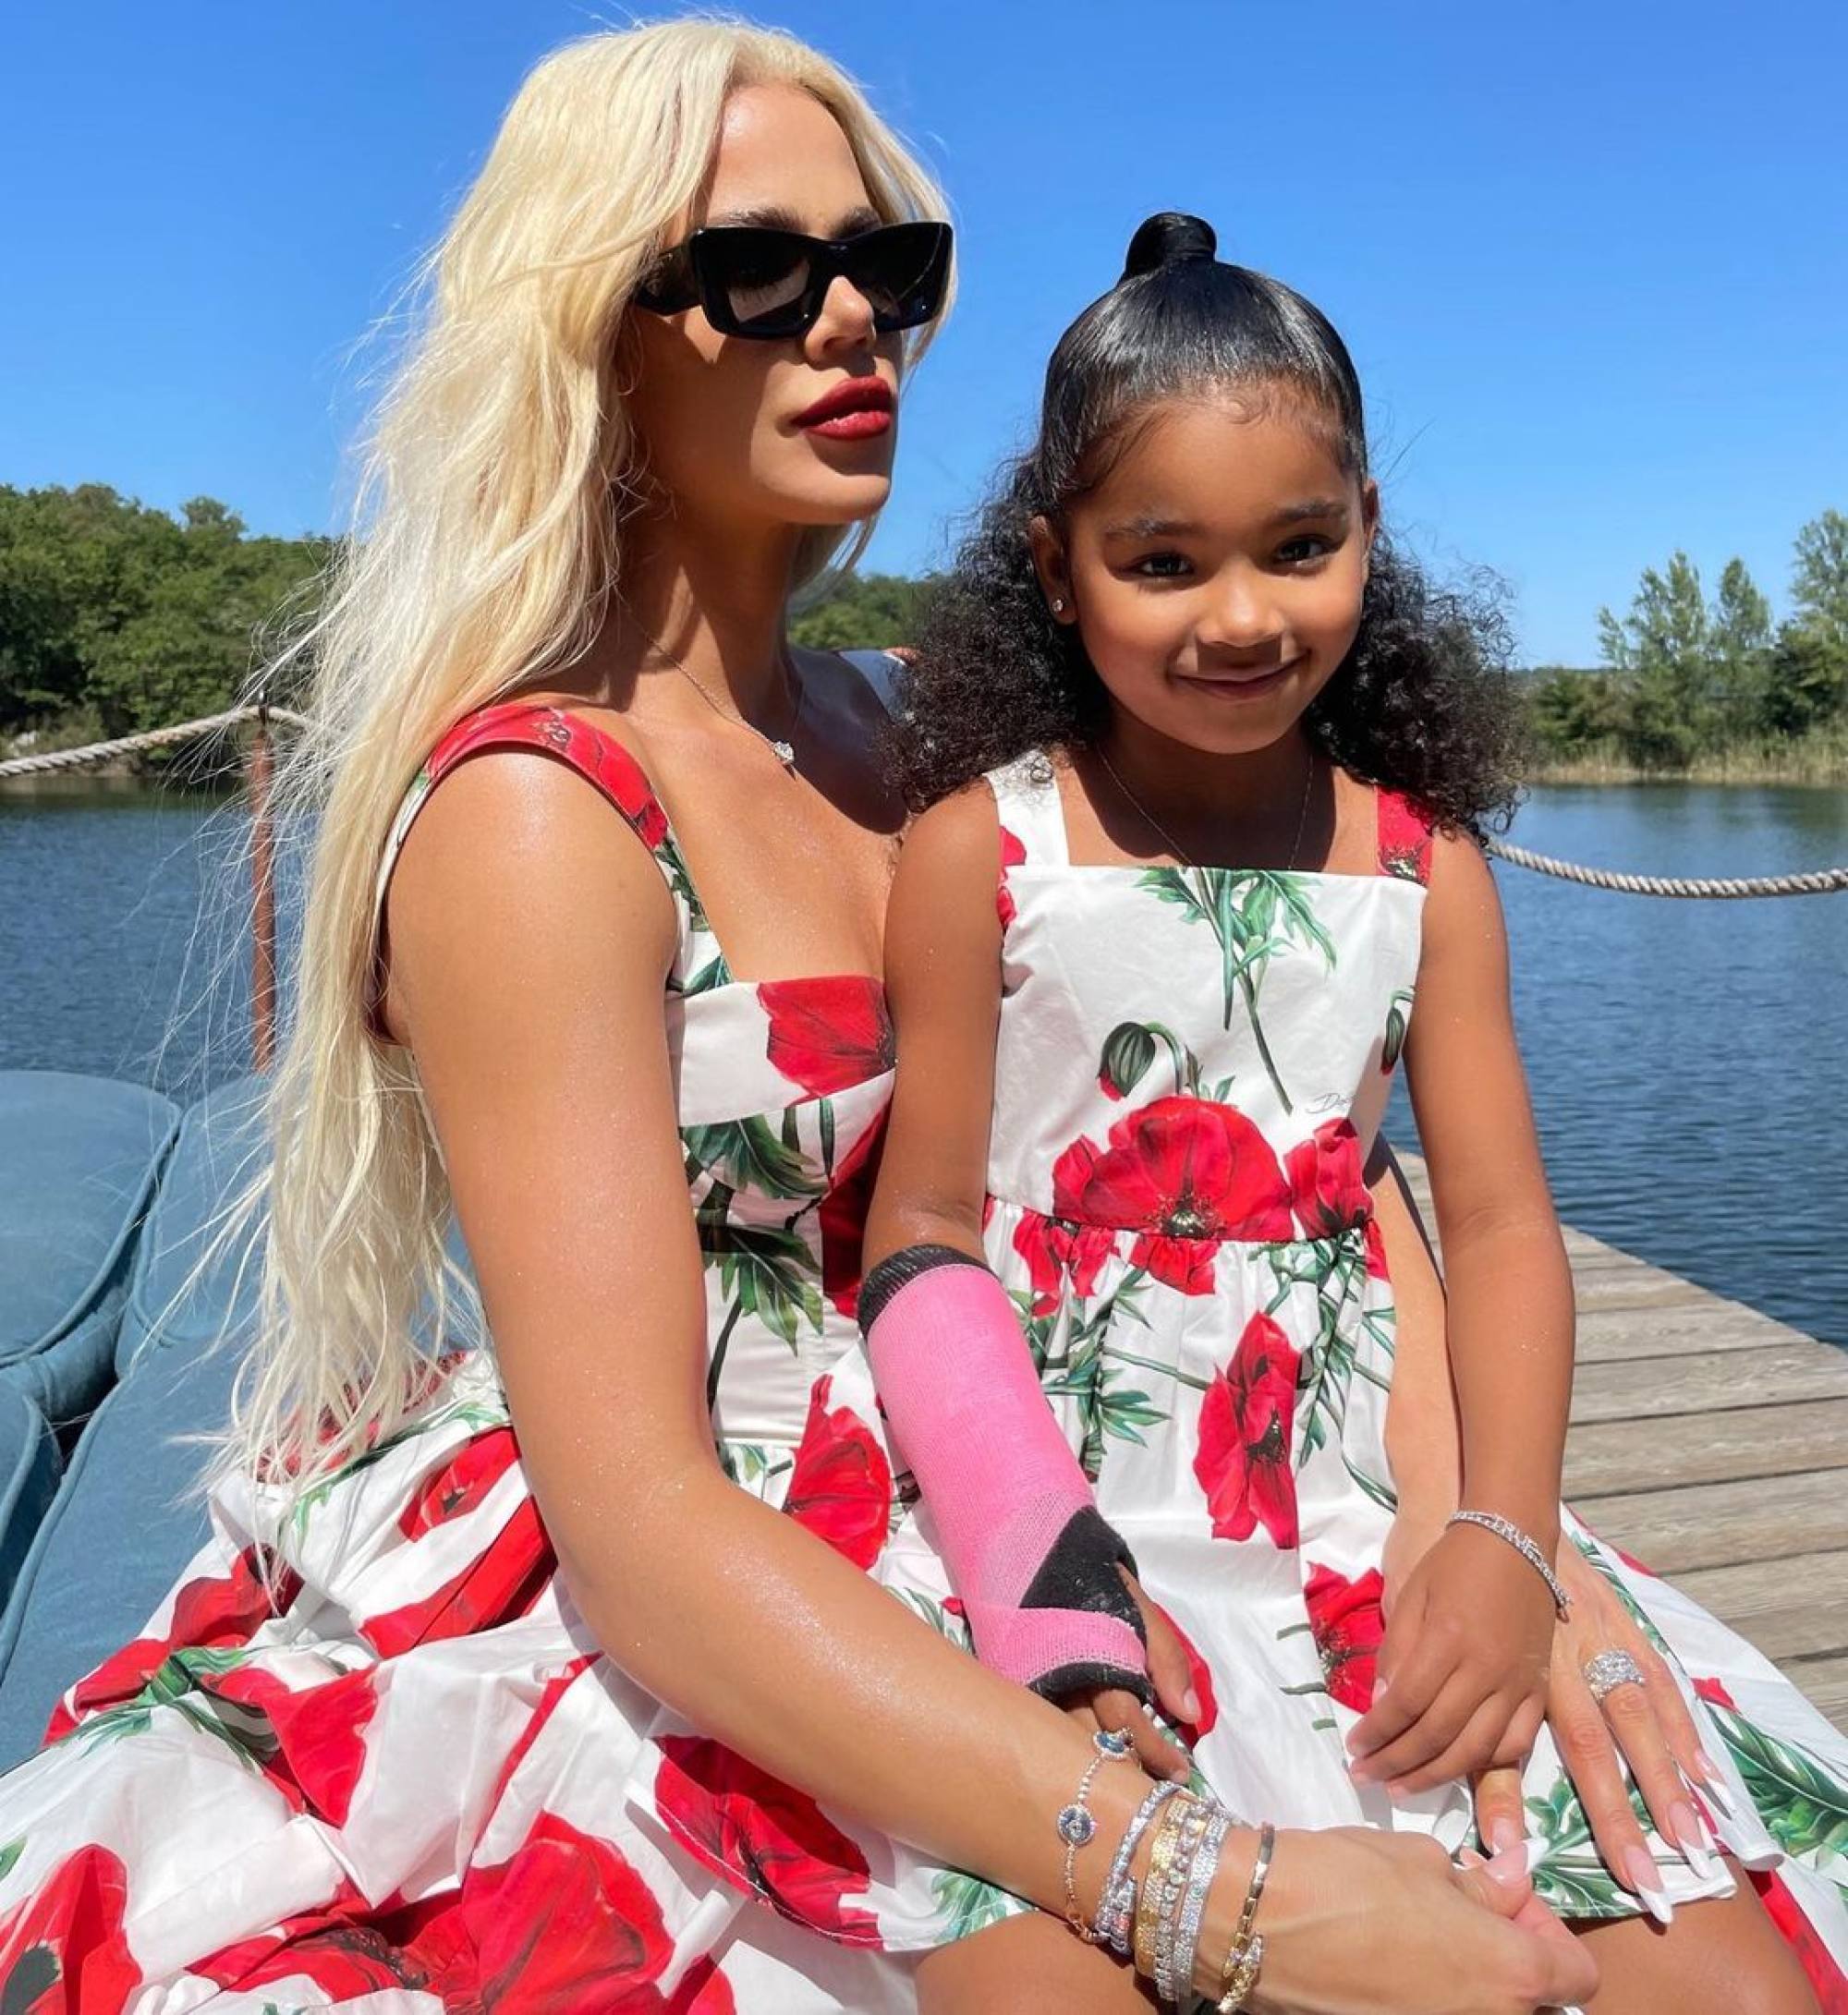 Khloe Kardashian Twins With Daughter True Thompson in Purr-fect Look